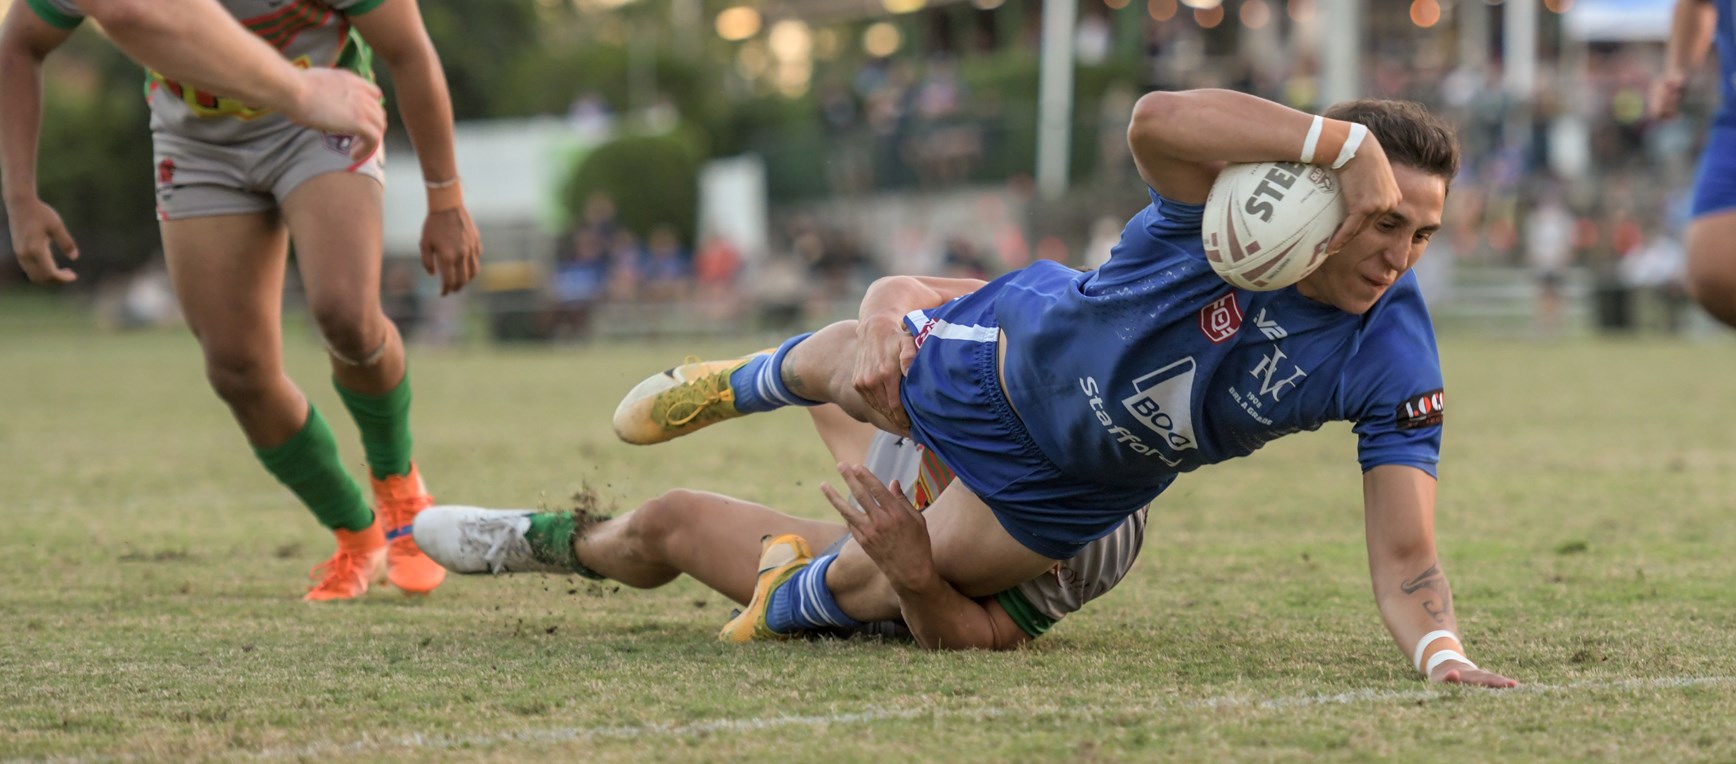 In pictures: Valleys reign supreme over Beenleigh